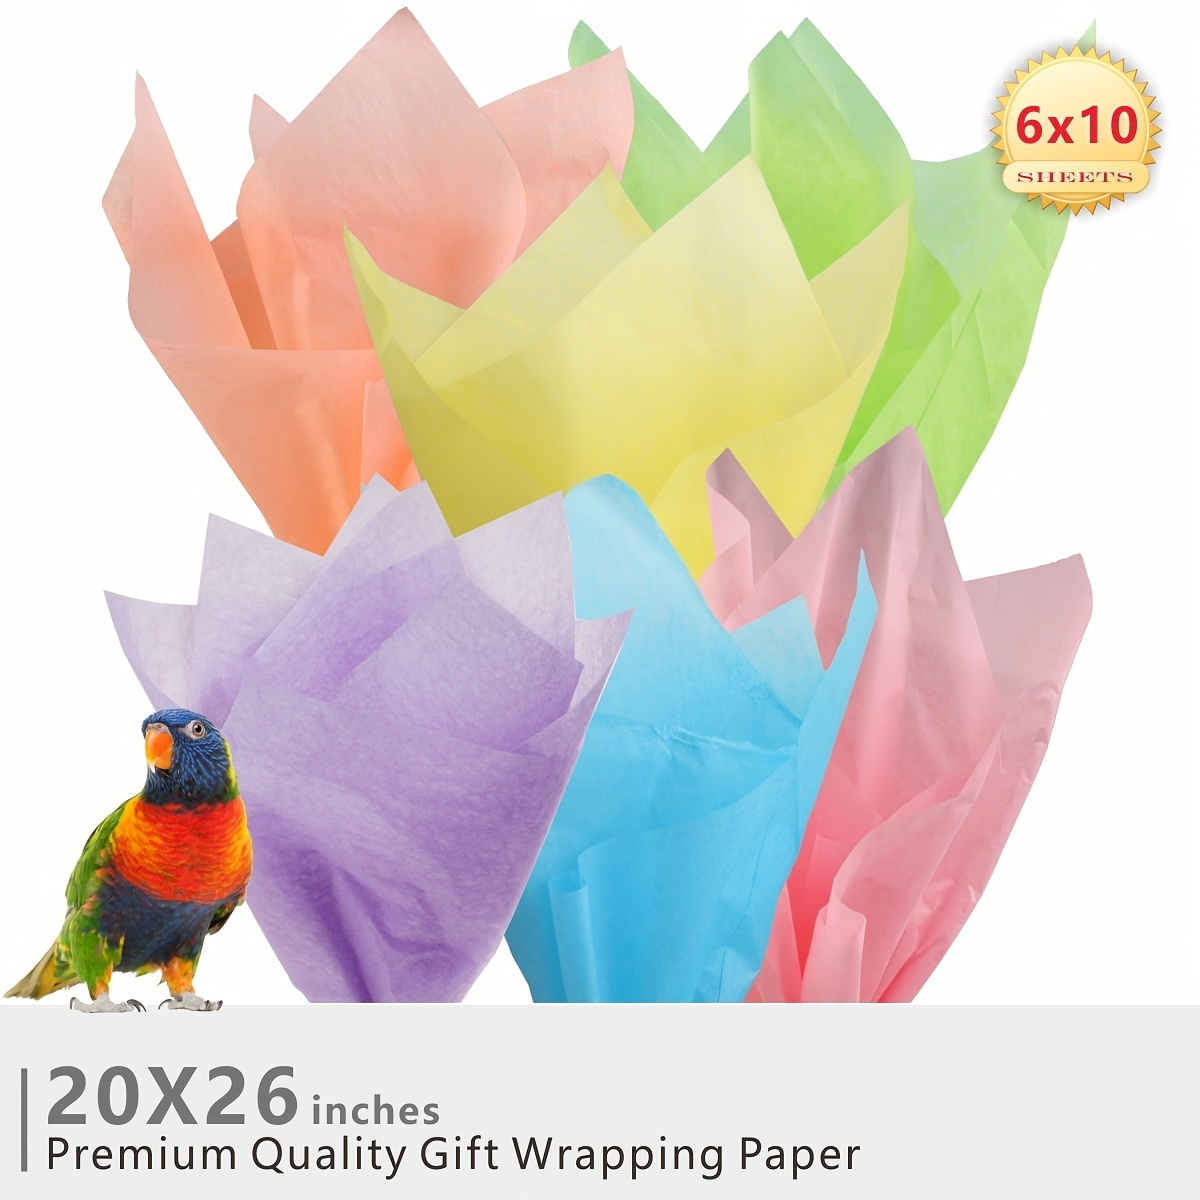 

60 Sheets Of 6 Macaron Colors Assorted Wrapping Paper, 20x26 Inches, Translucent Wrapping Paper, Tissue Paper, Craft Paper (6 Small Packs, 1 Pack Per Color, 10 Sheets Per Pack)